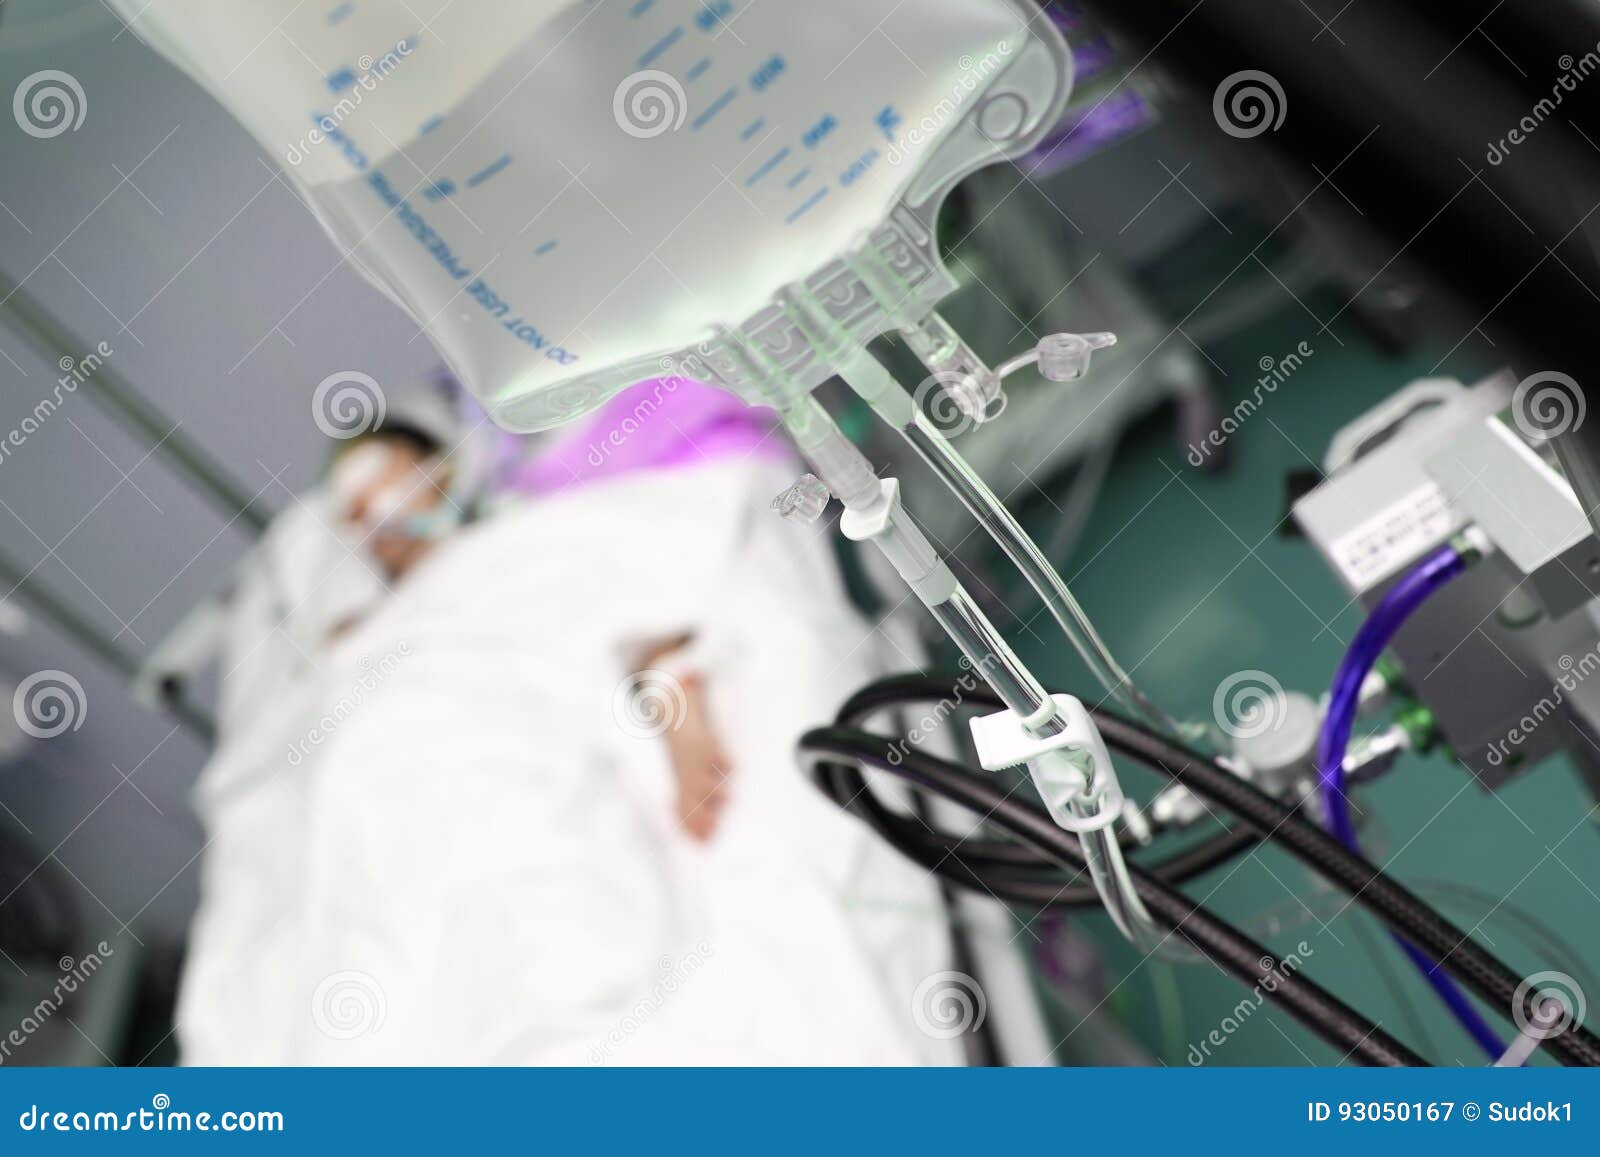 Comatose Patient Photos Free Royalty Free Stock Photos From Dreamstime